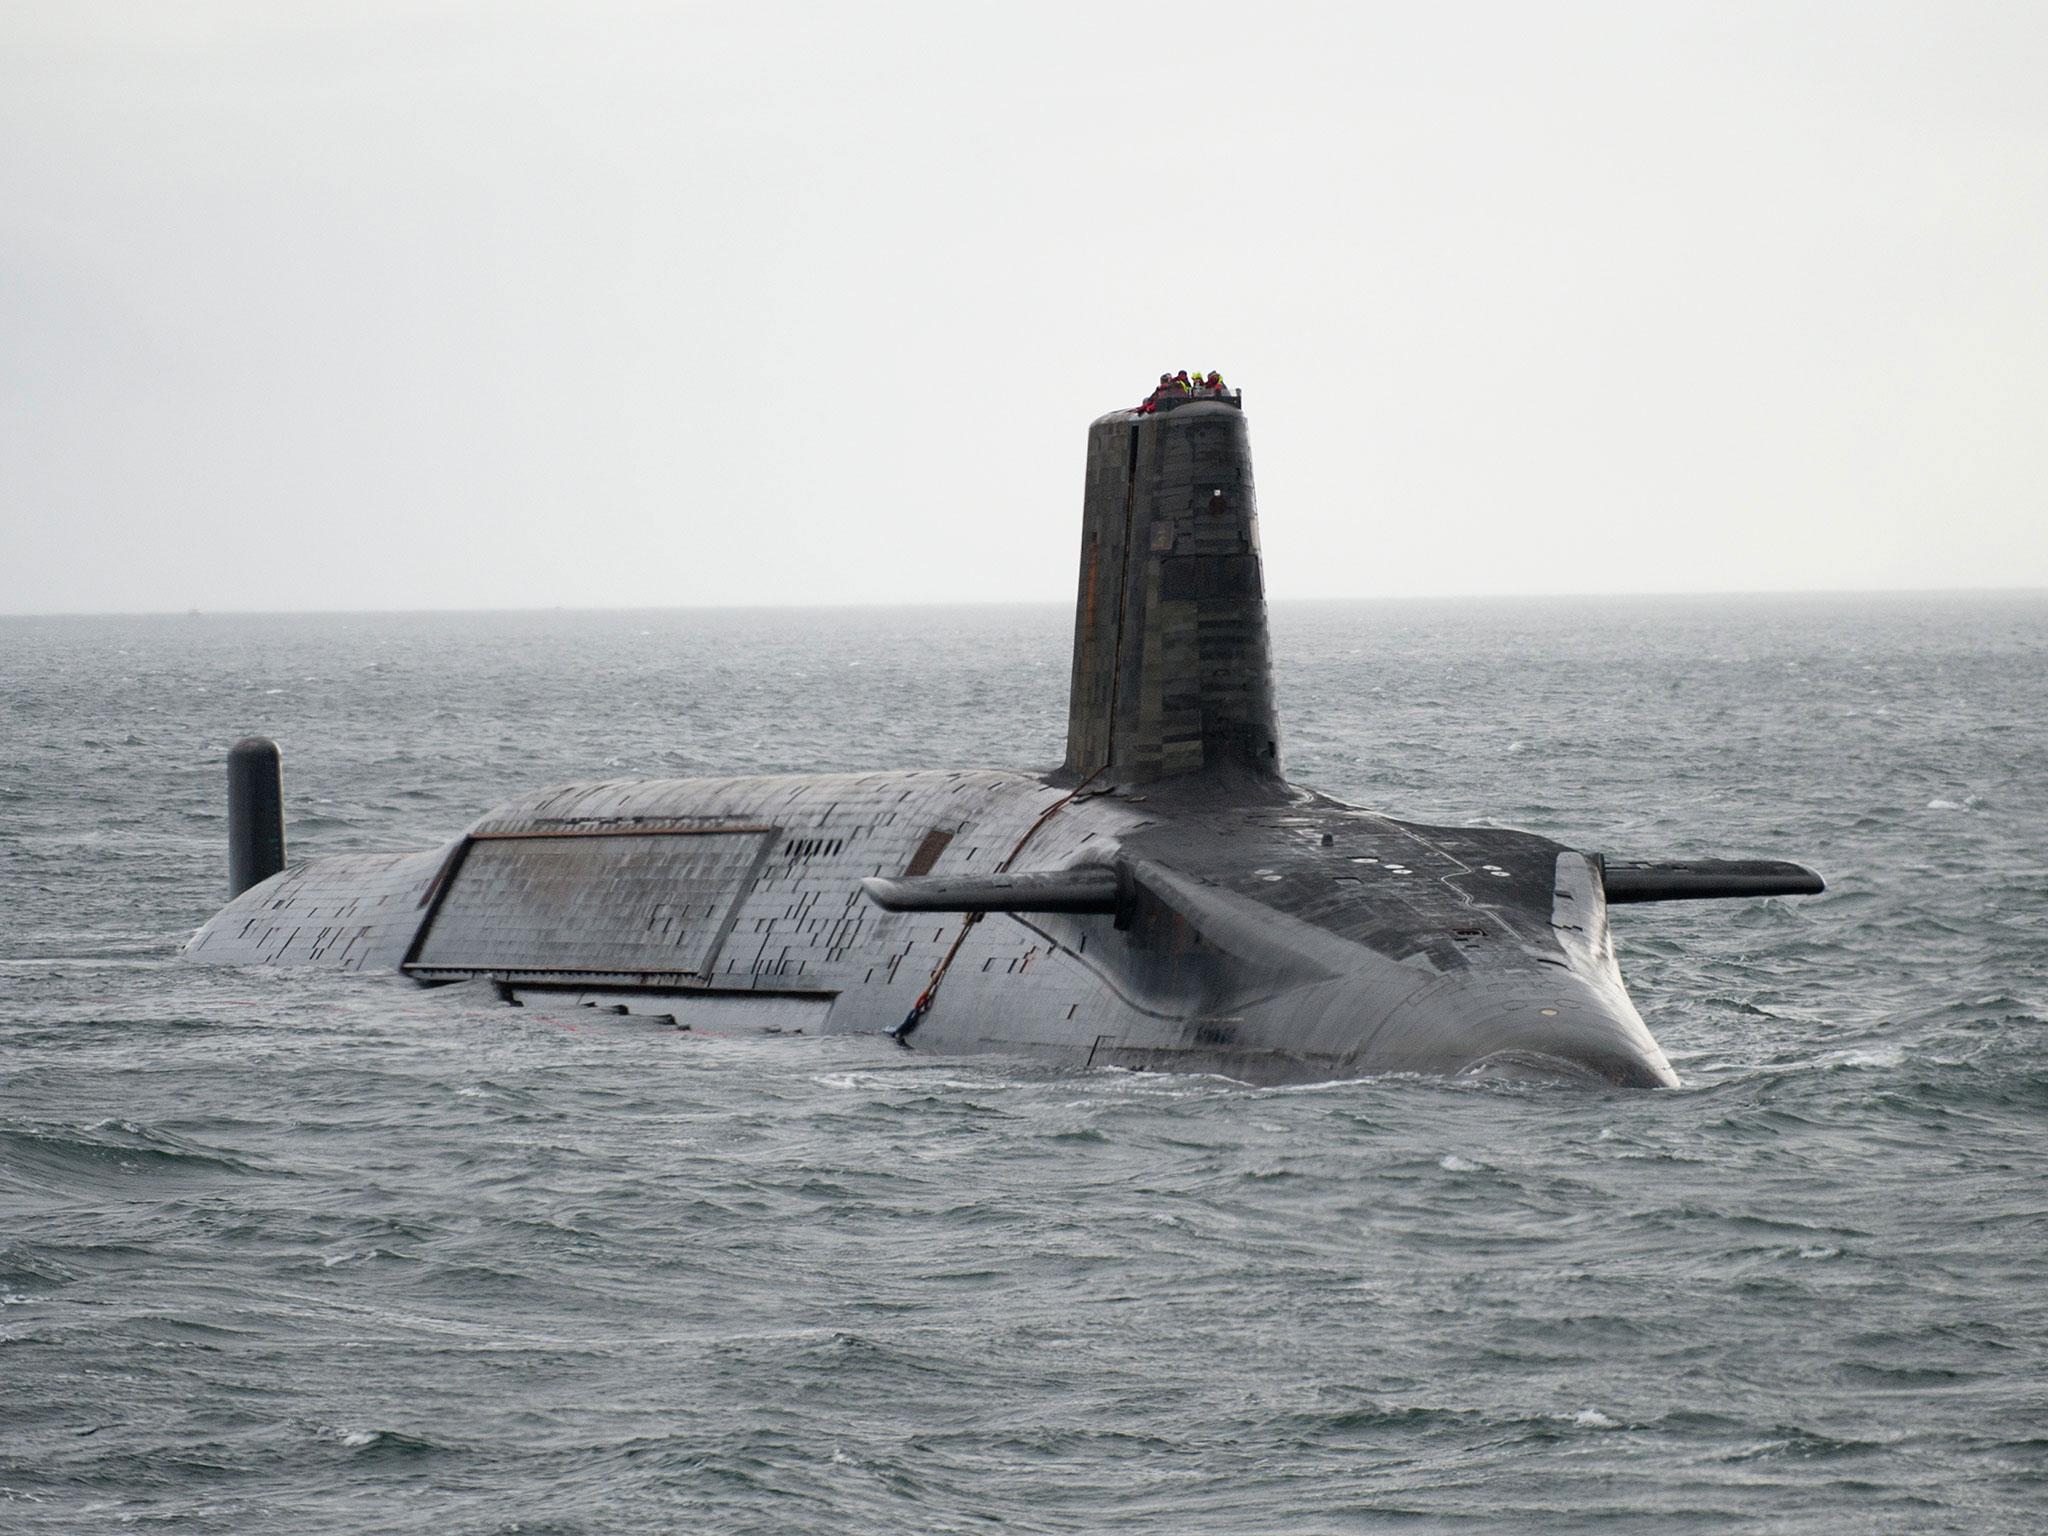 MPs voted overwhelmingly in July to back the renewal of Britain's Trident nuclear deterrence